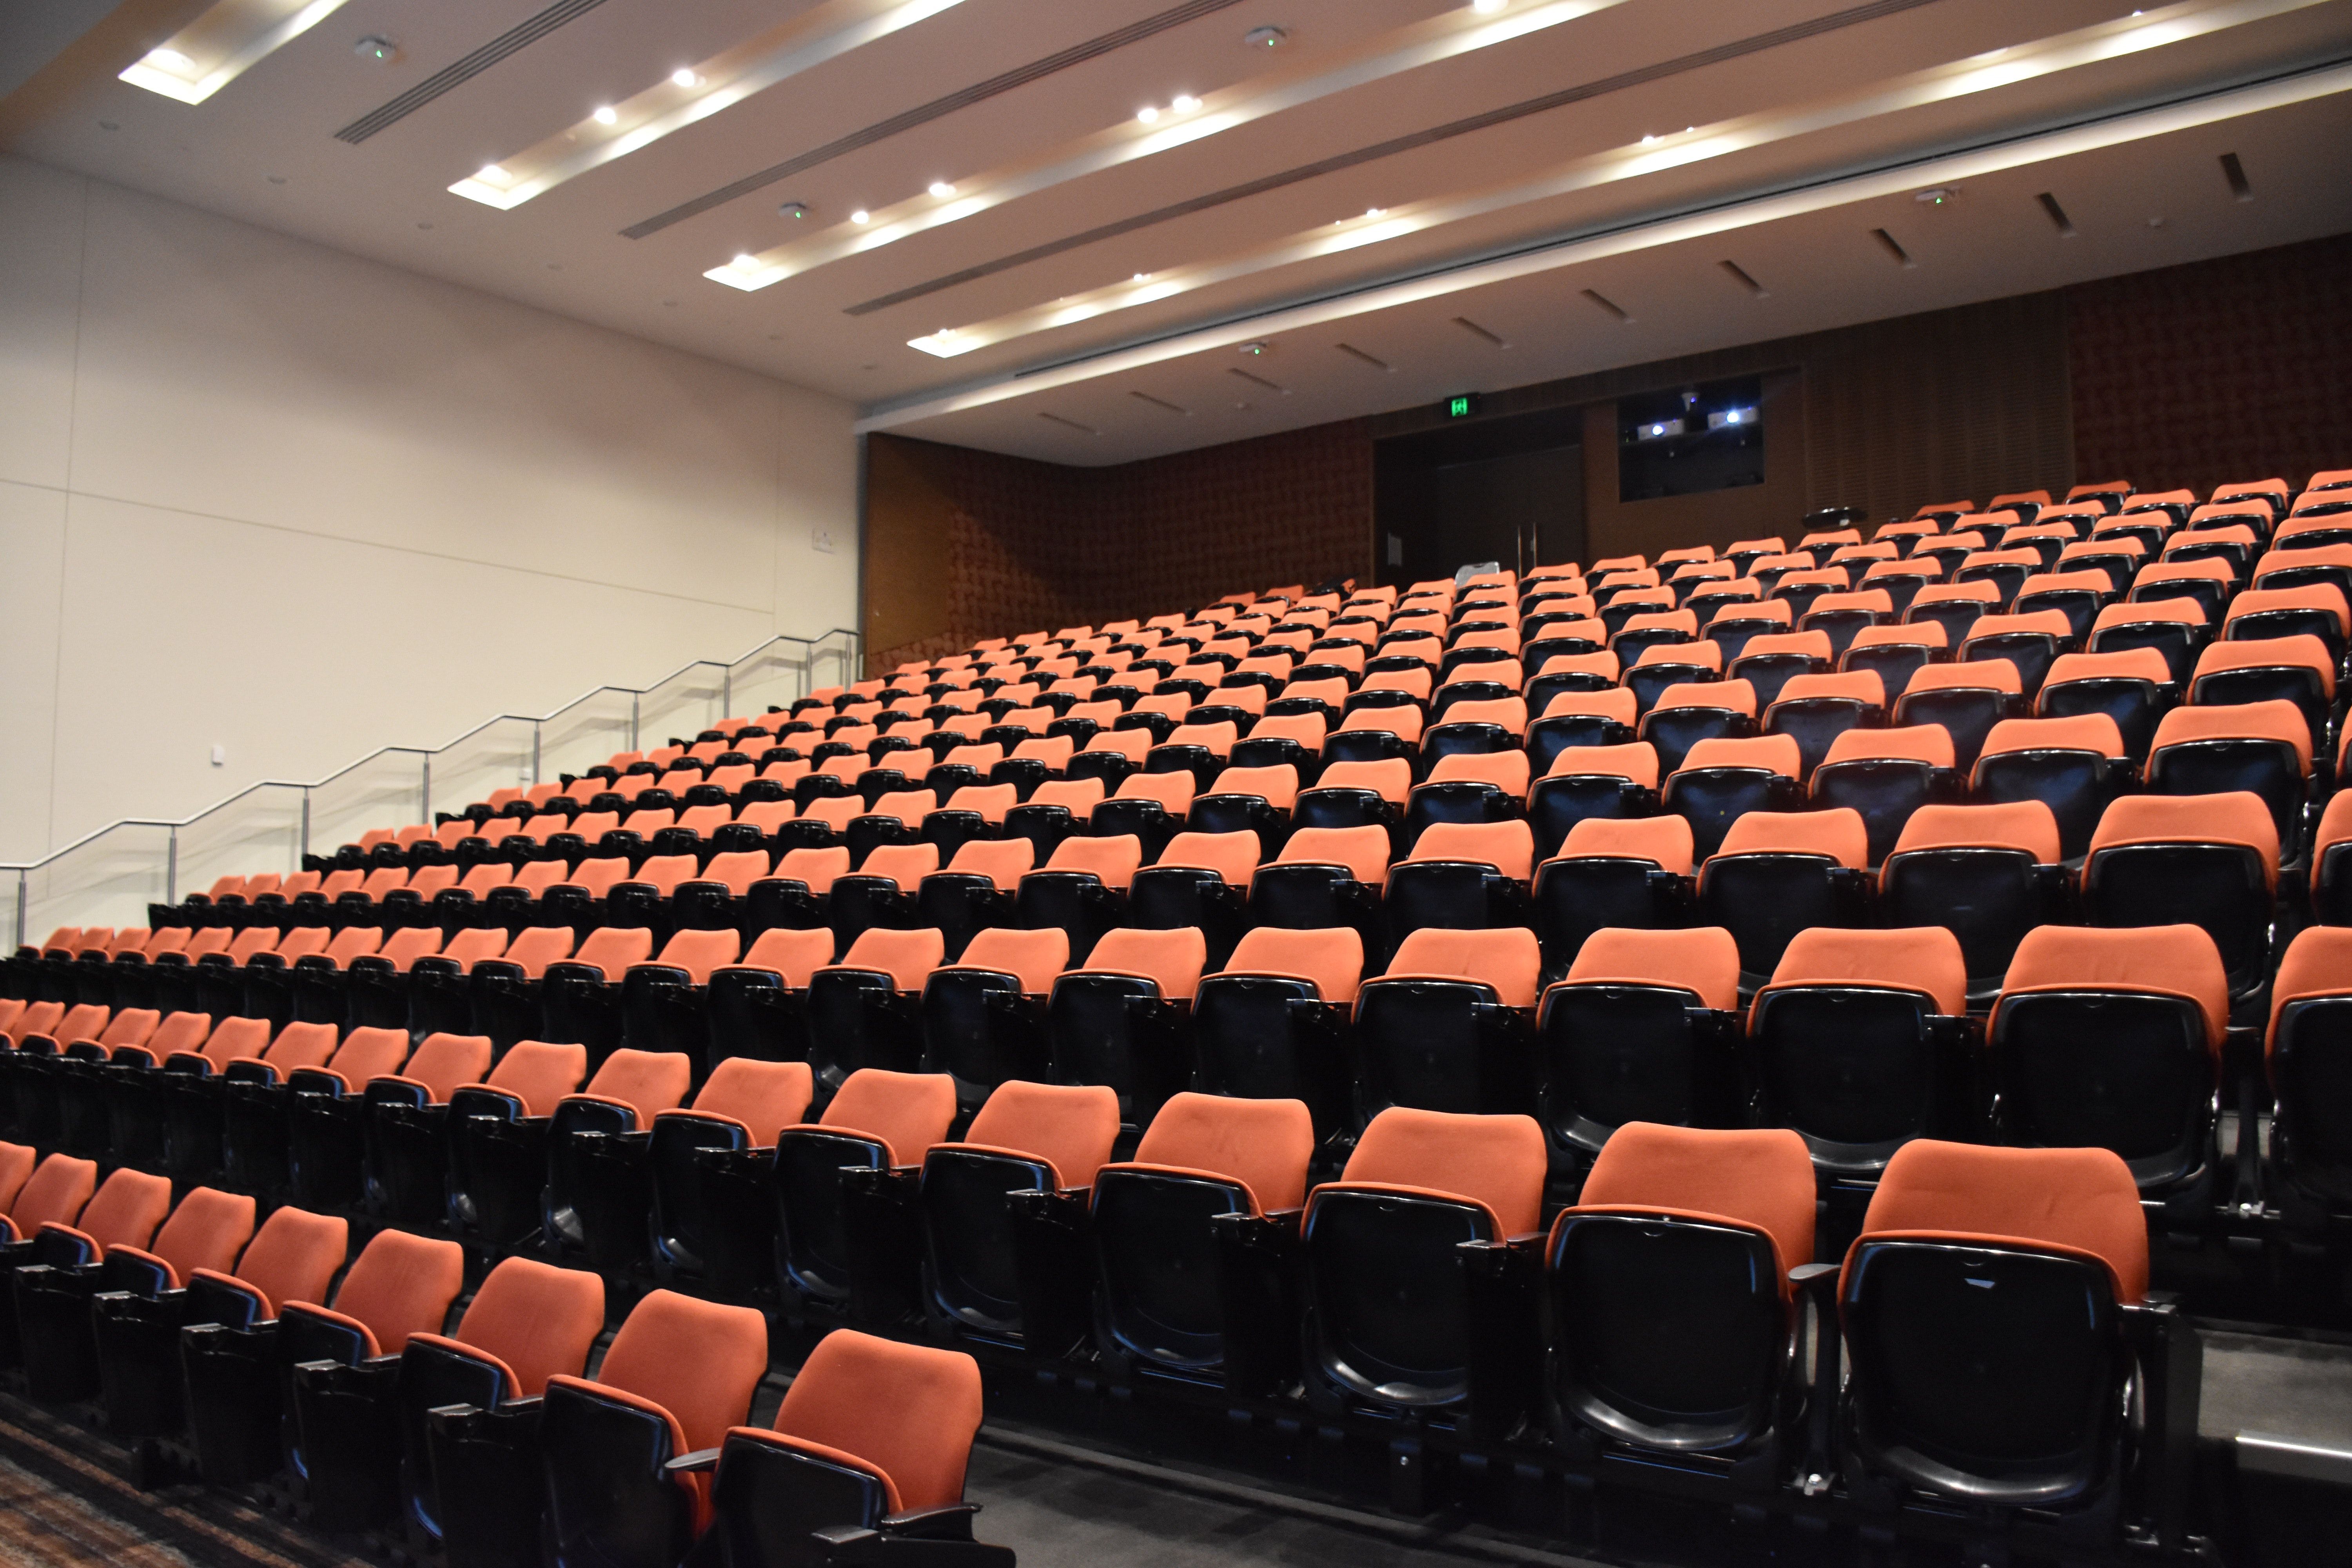 Free of auditorium, lecture hall, lecture theatre